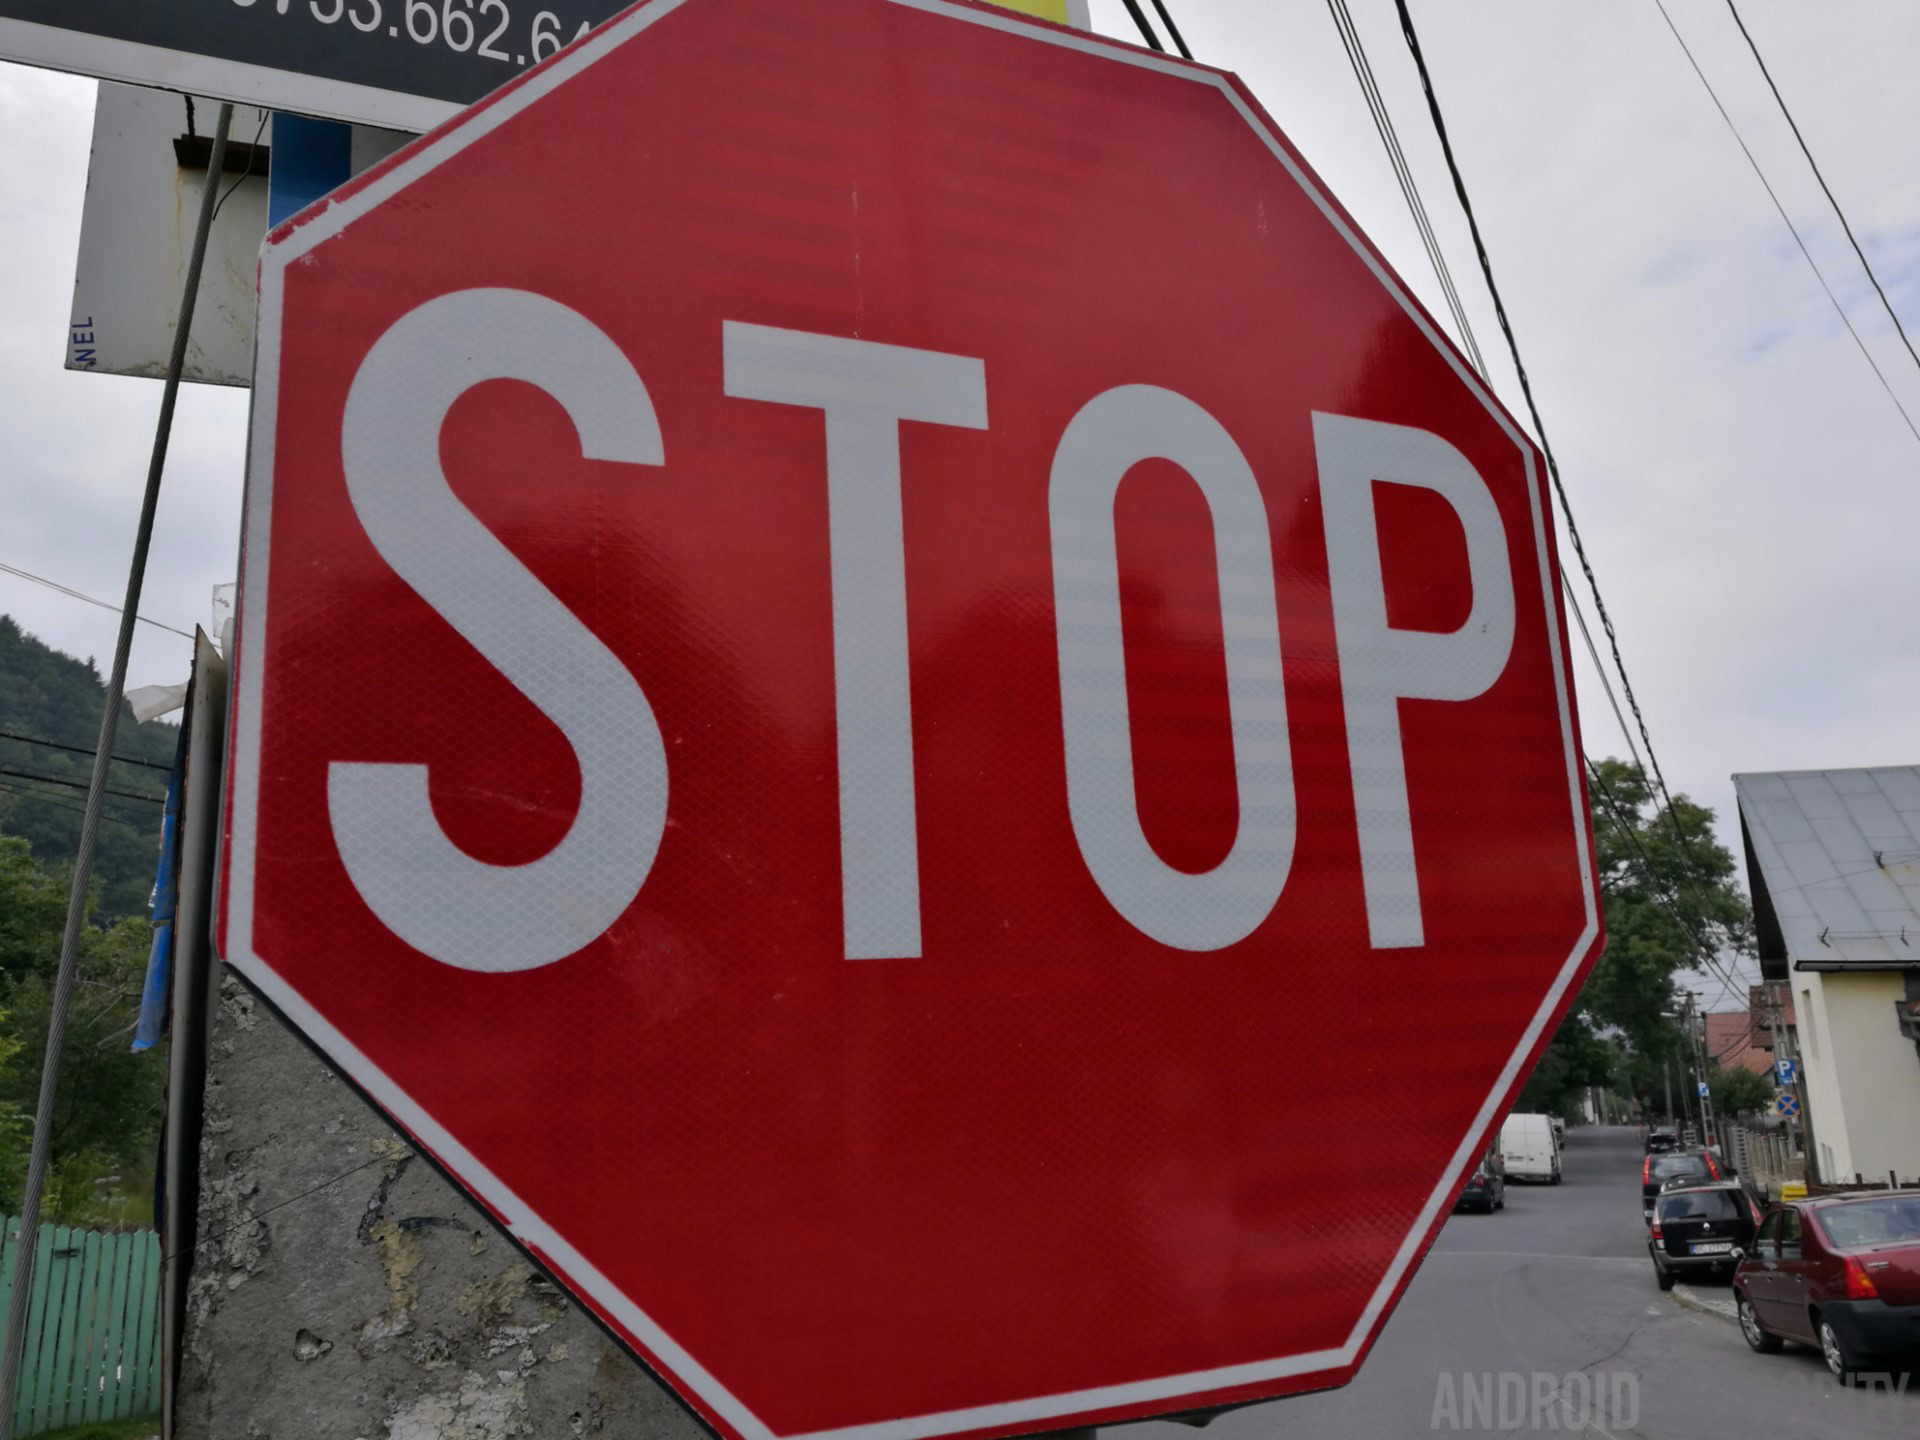 A stop sign shot on a Huawei P9 Plus